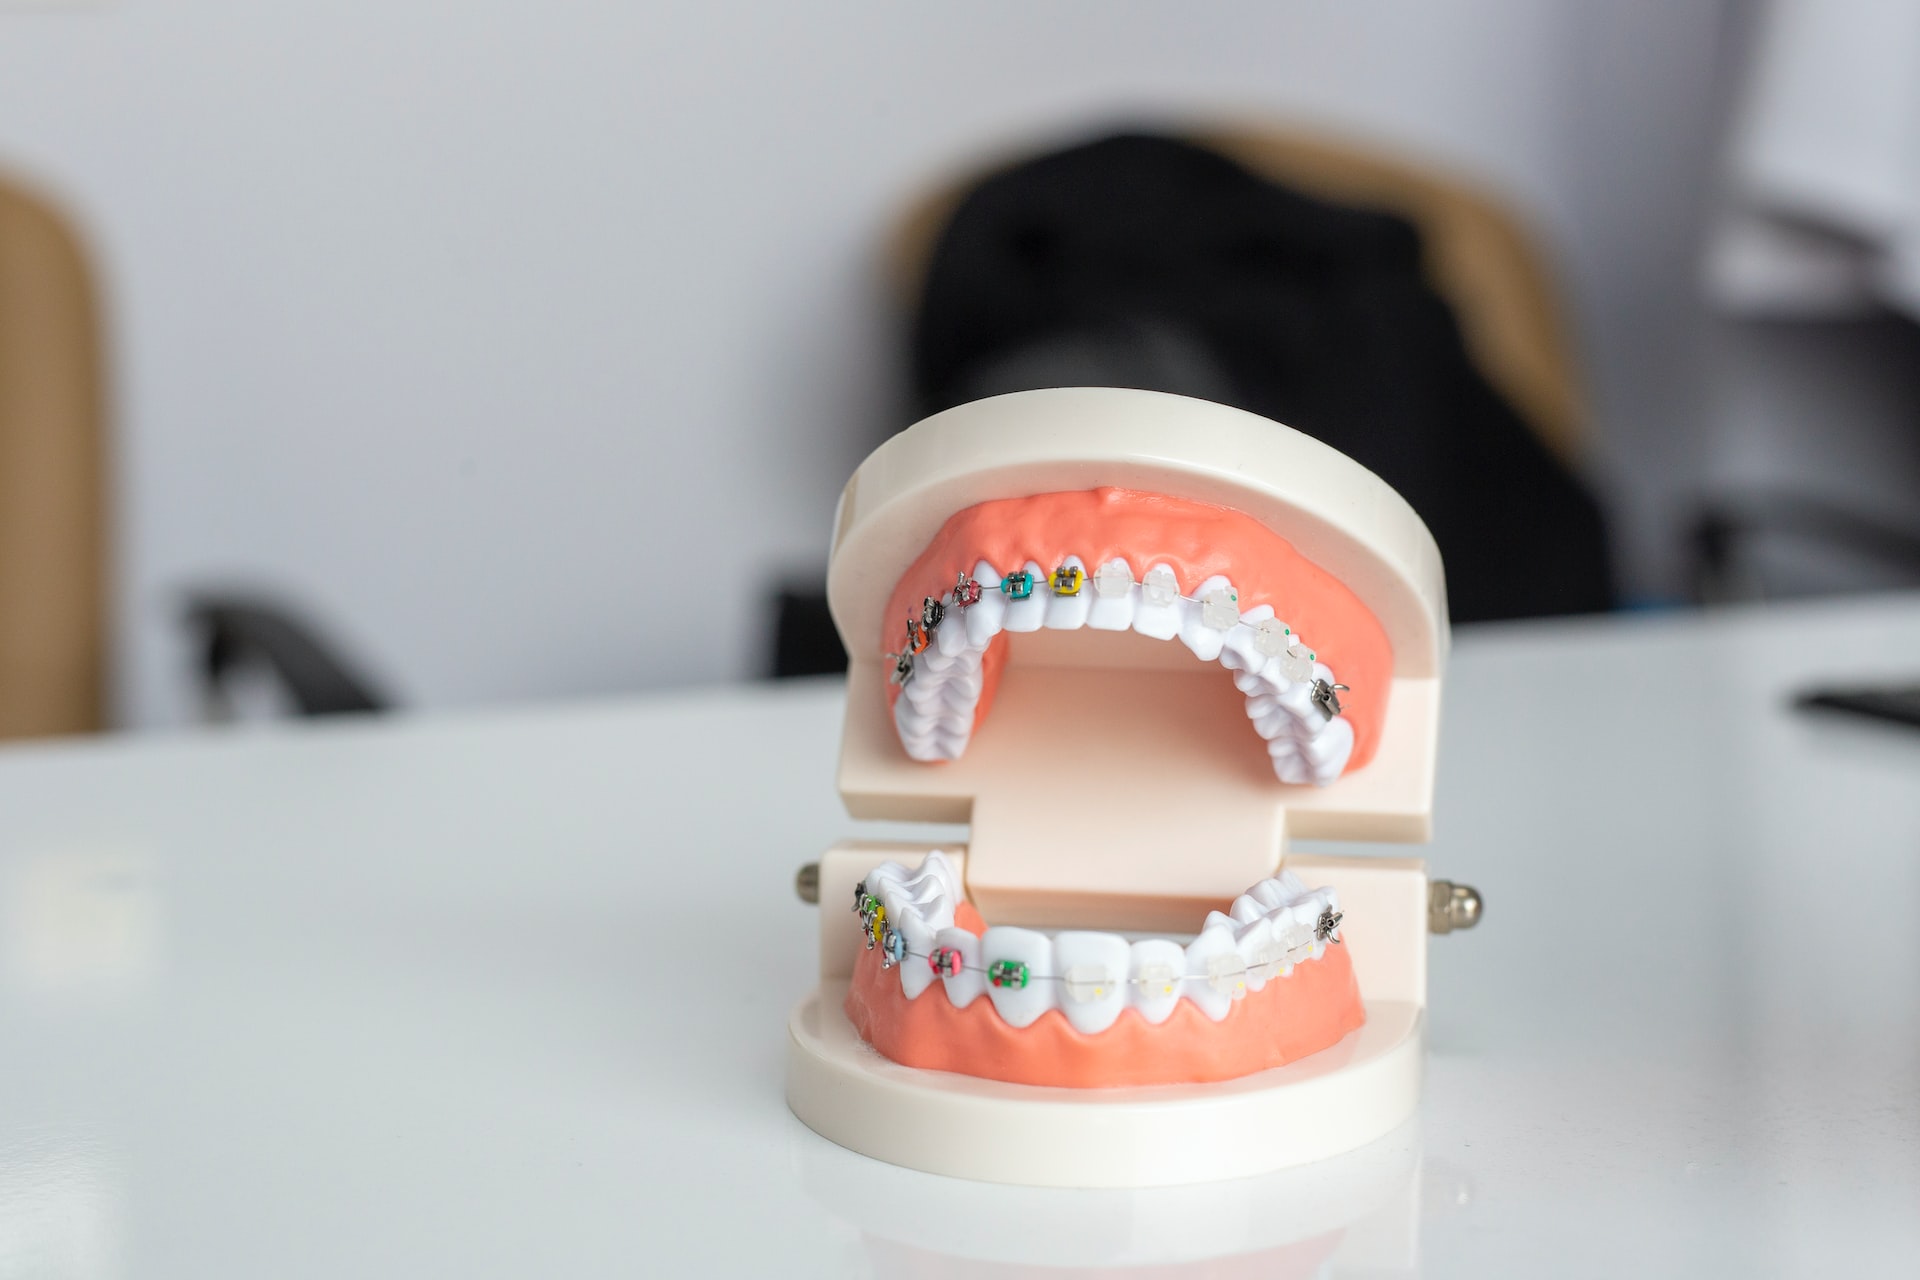 How an Orthodontist Fixes Crowded Teeth With Braces